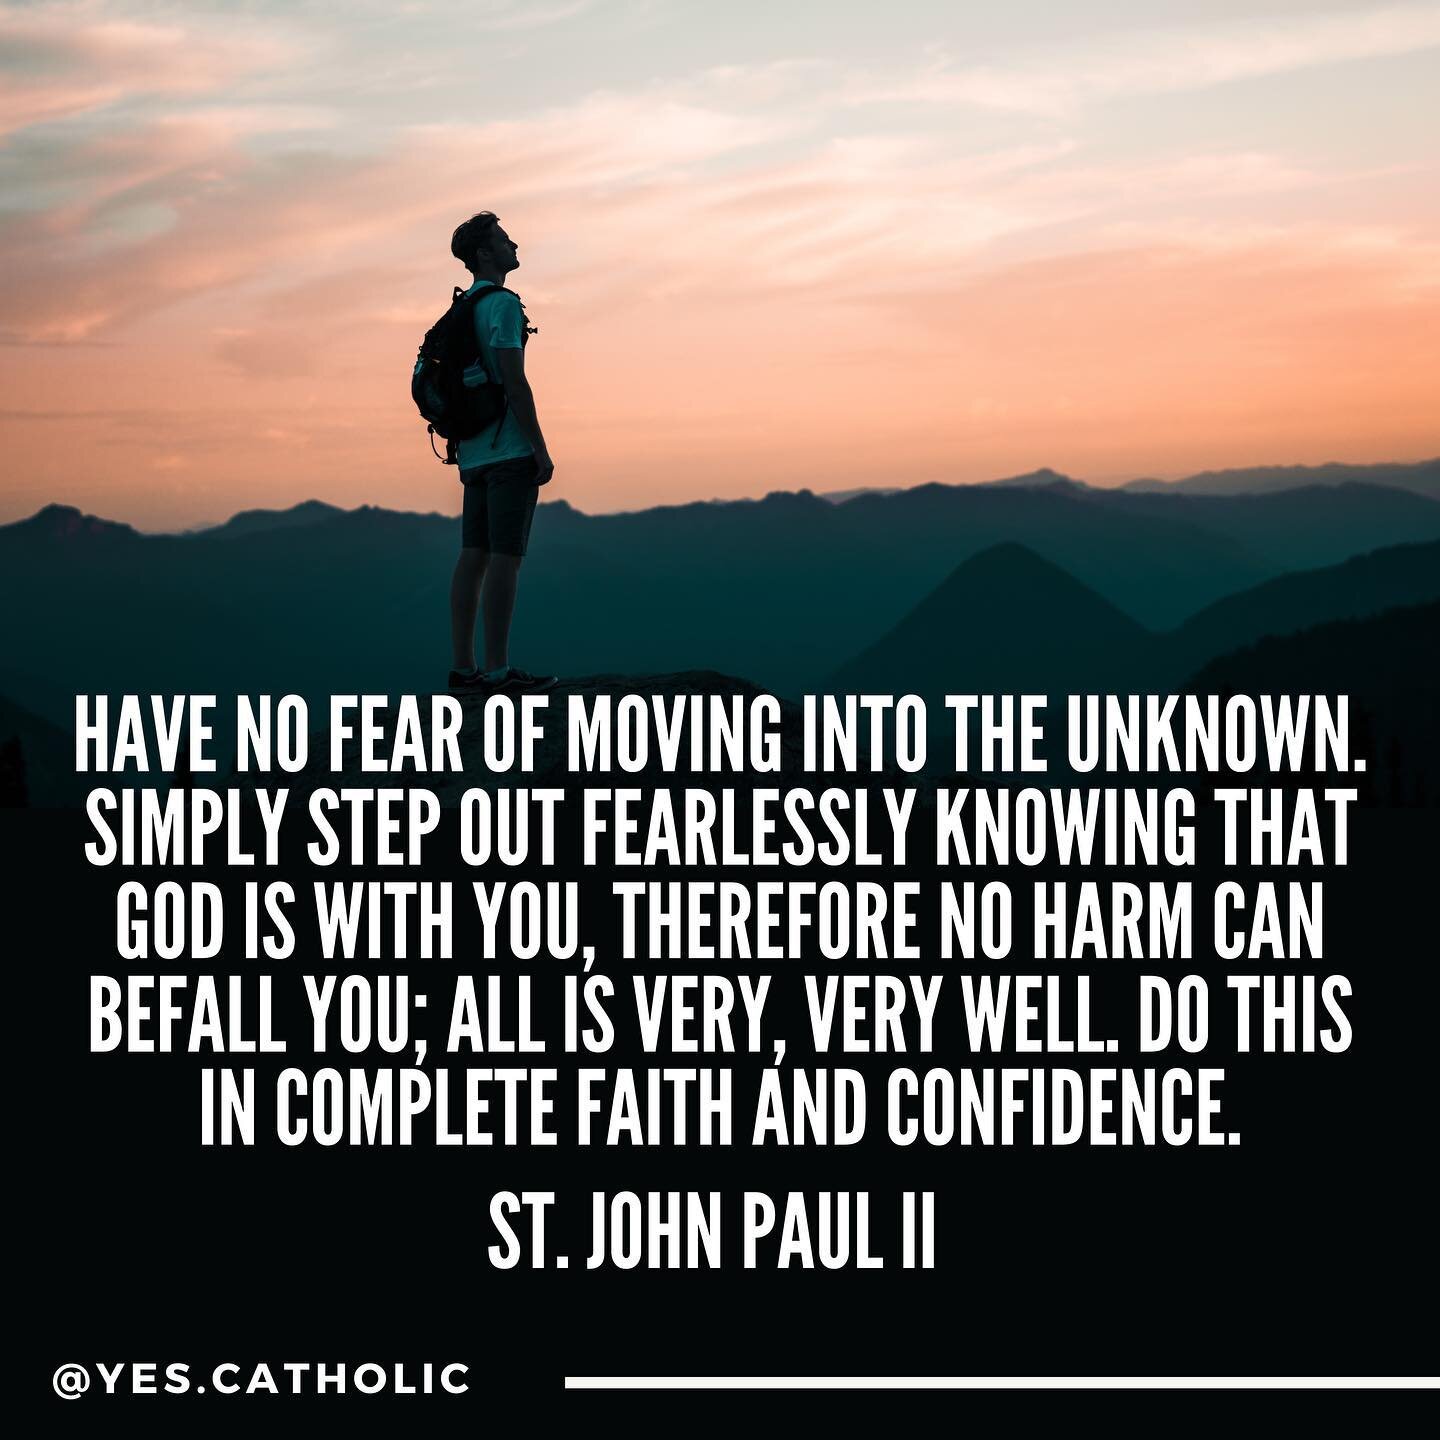 Apart from the Blessed Mother and St. Joseph, St. John Paul II is my favorite saint. He spoke these words with passion and conviction because he first lived in radical obedience to them himself. All of us can get complacent or fearful at times, but G